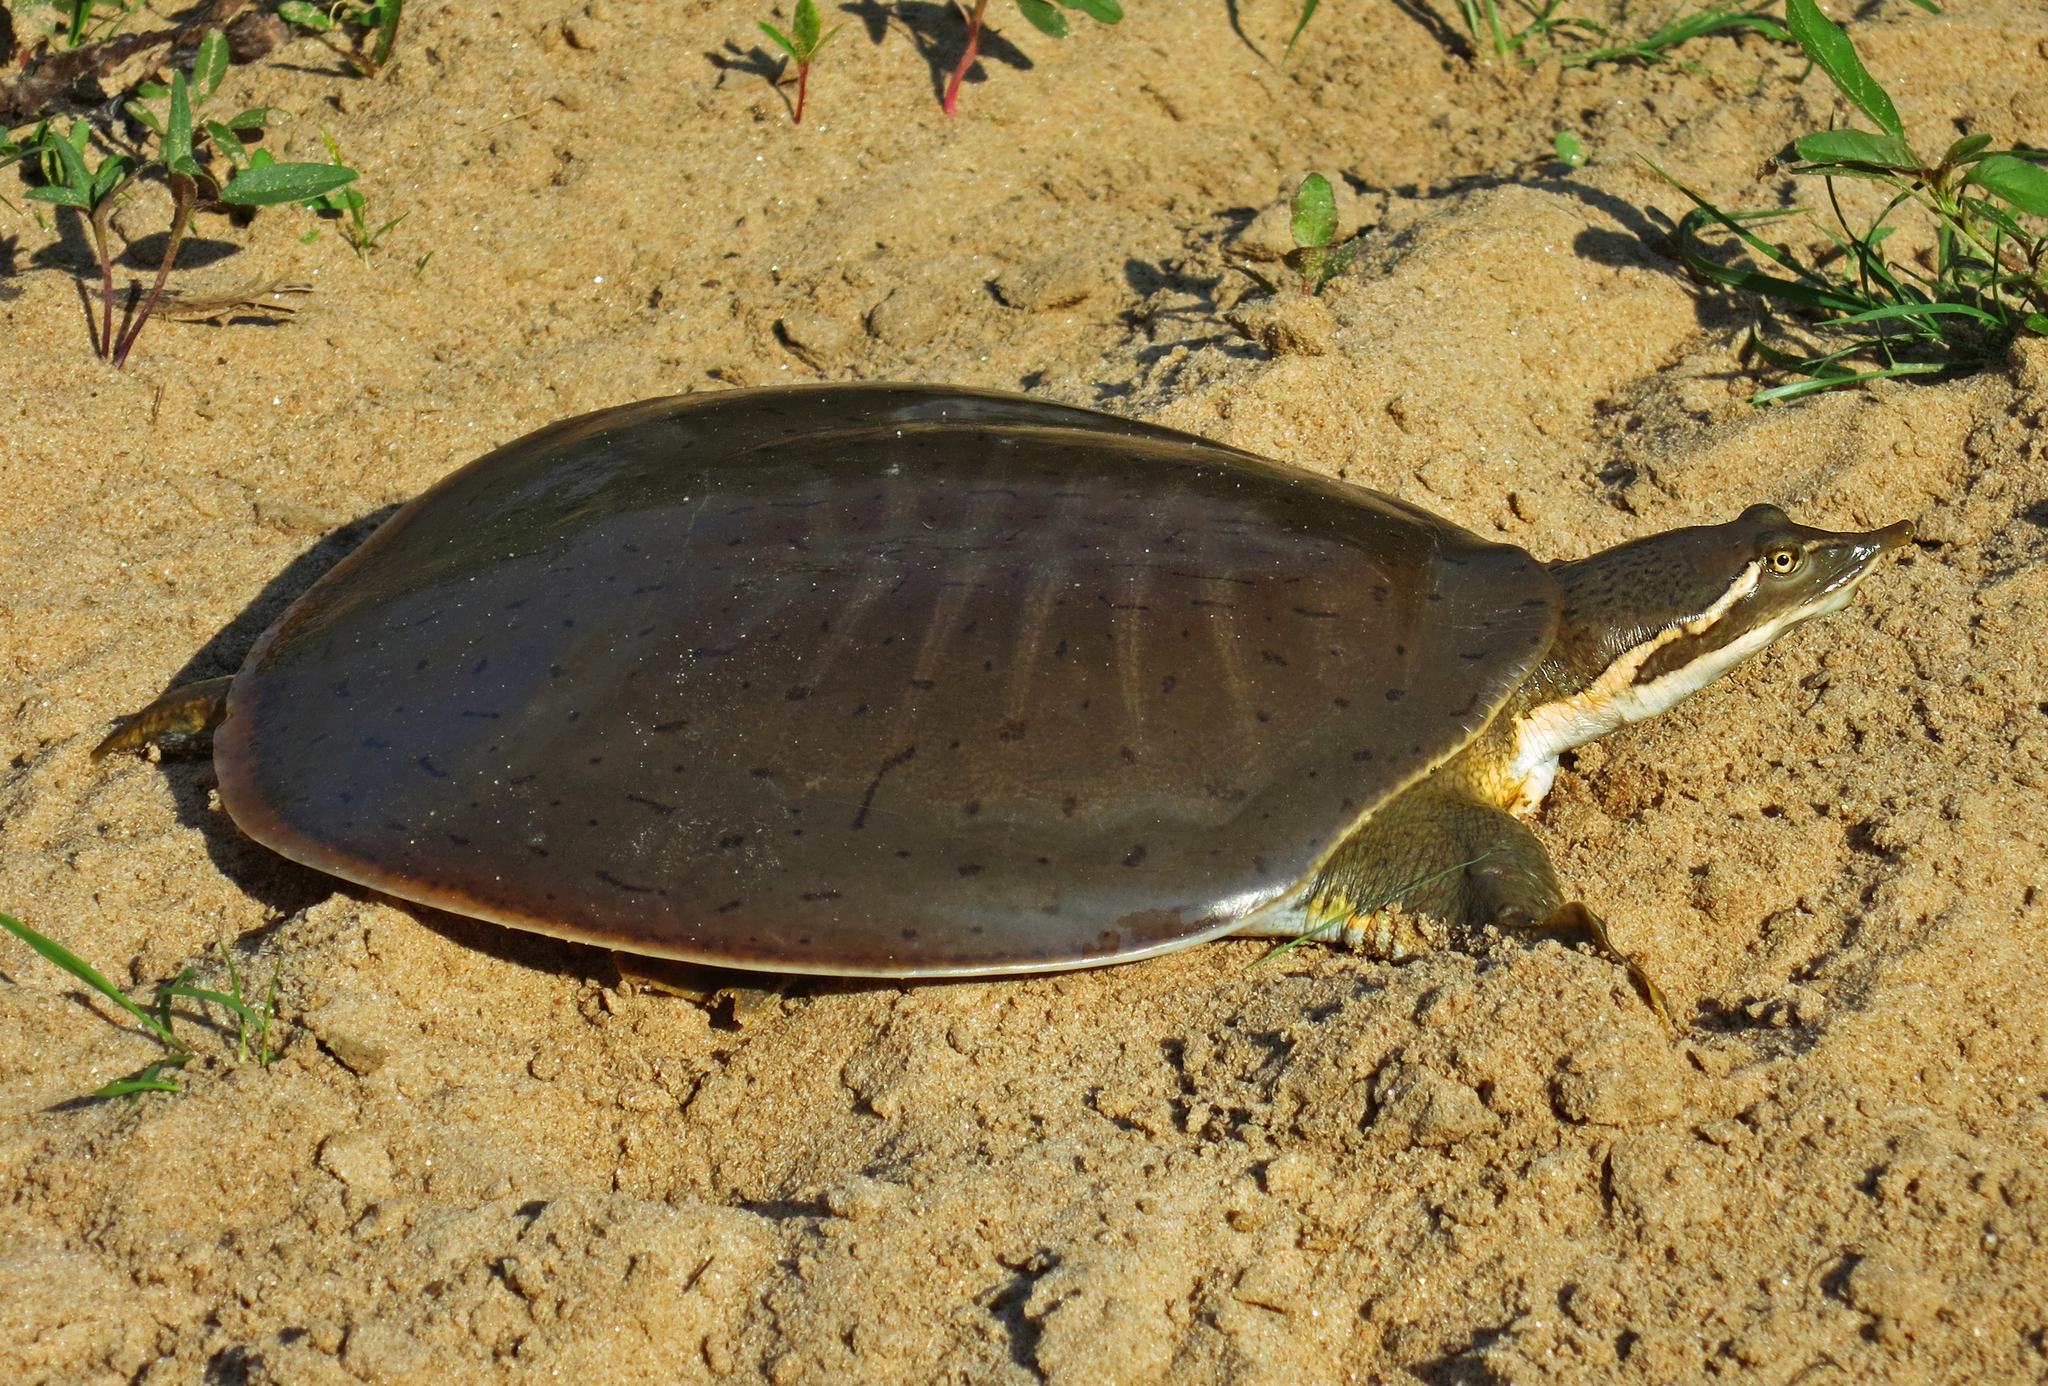 smooth softshell turtle resting on sand